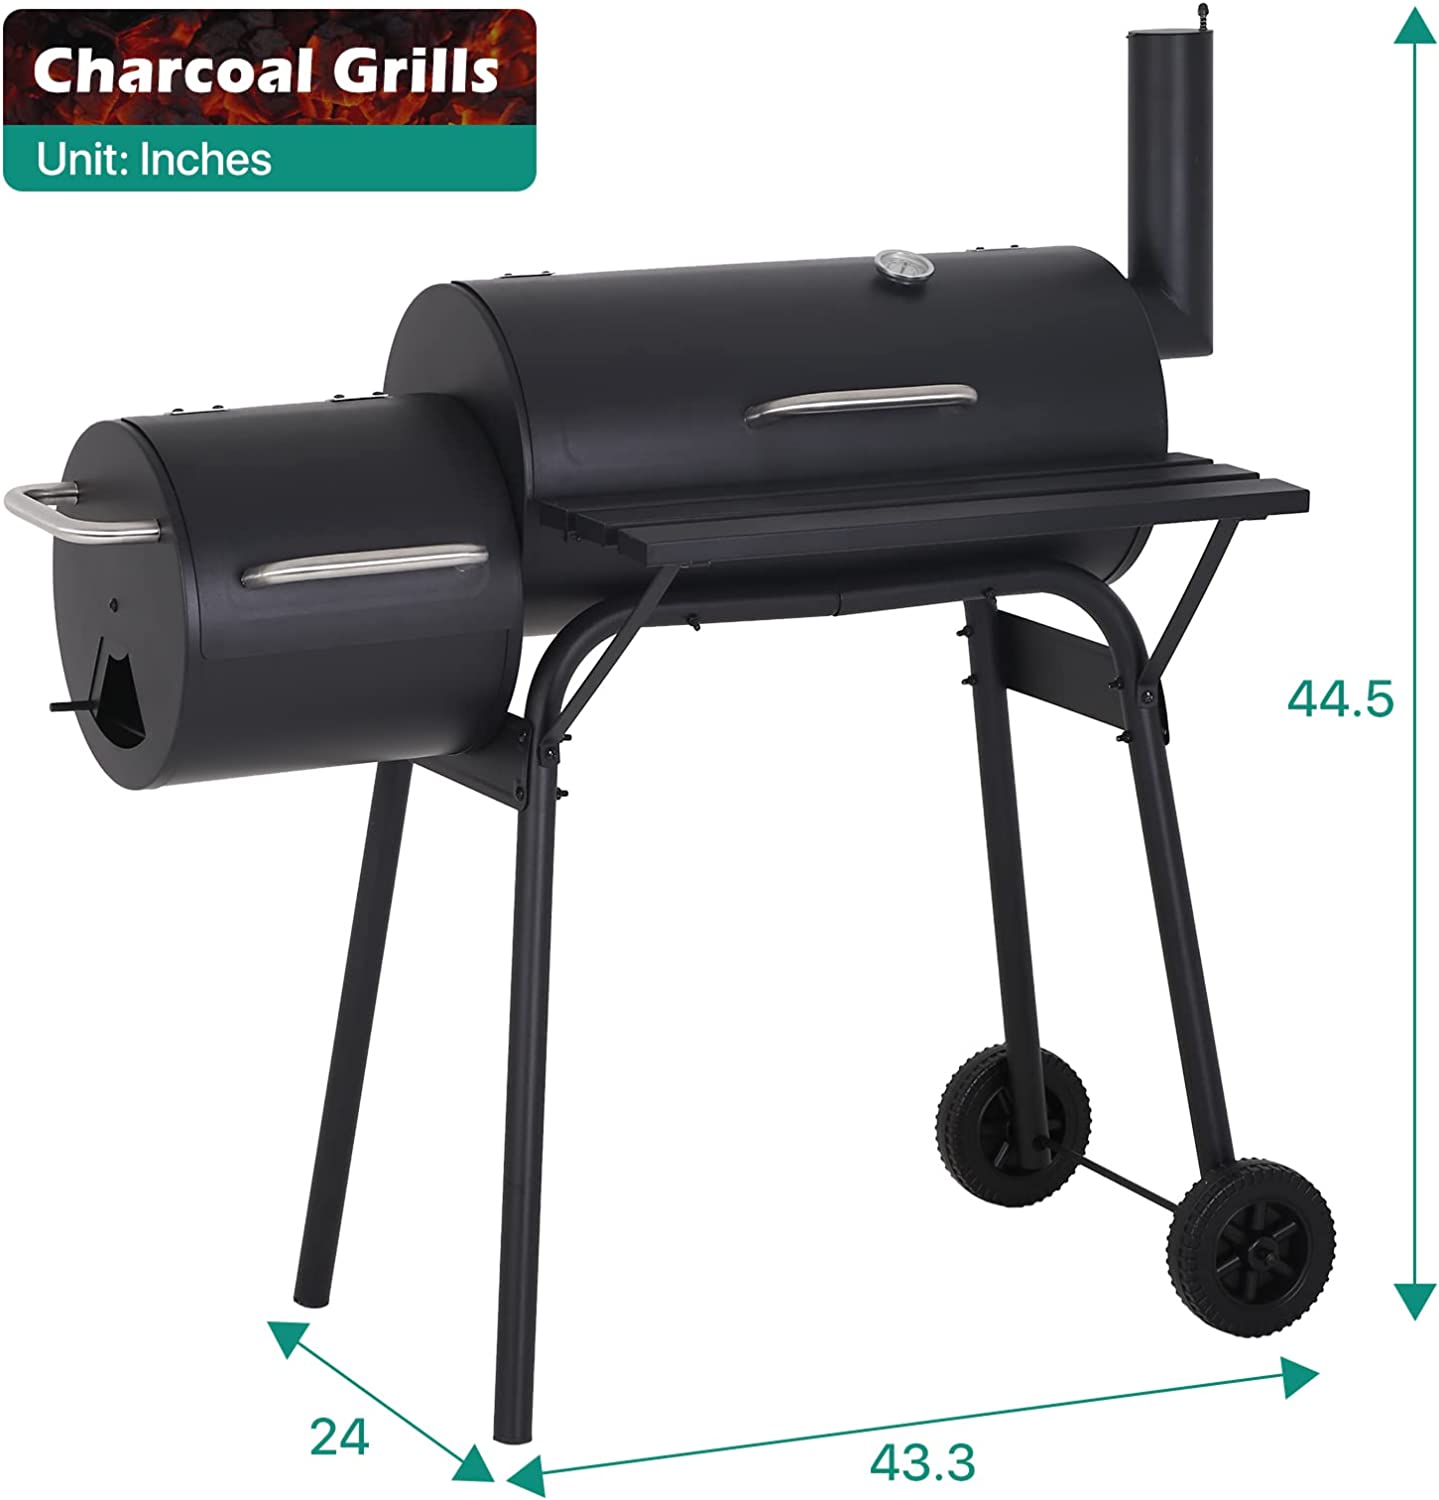 NiamVelo BBQ Charcoal Grills Outdoor BBQ Grill Camping Grill, Stainless Steel Grill Offset Smoker with Cover, Portable BBQ Barbecue Grill for Picnic Camping Party, Black - image 5 of 7